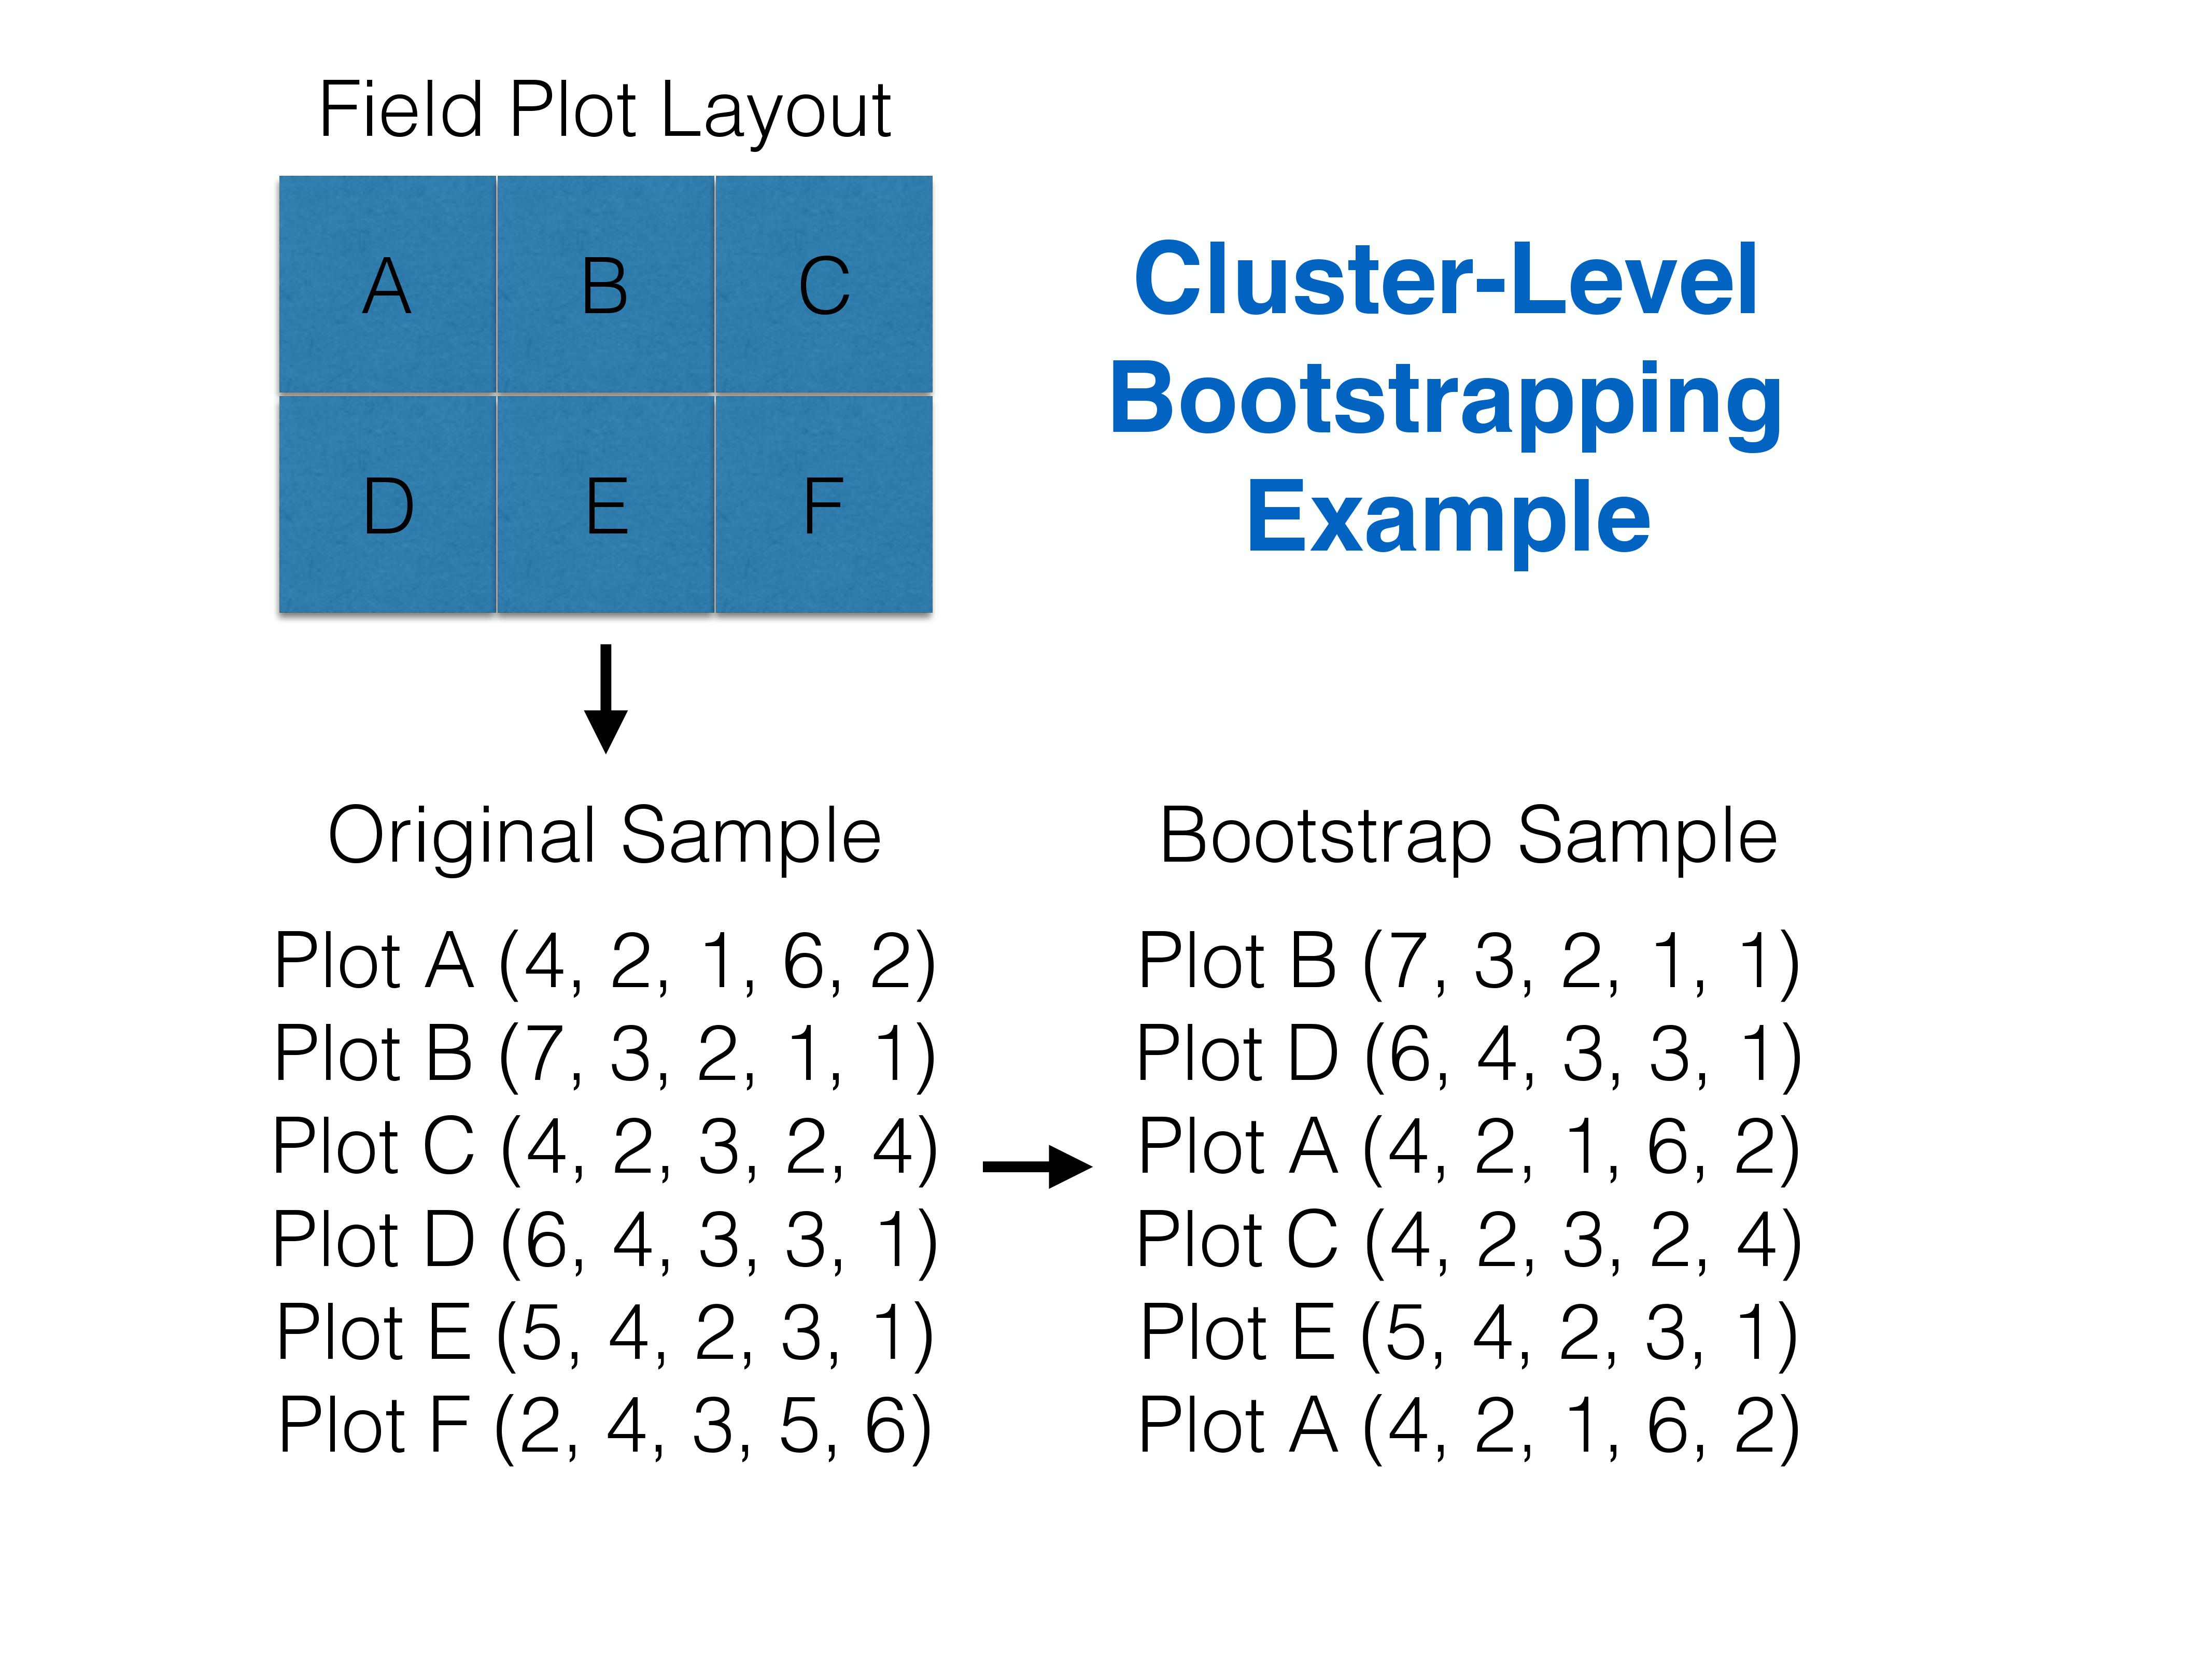 Cluster-level bootstrapping resamples whole clusters of observations with replacement. Figure constructed by Althea Archer.